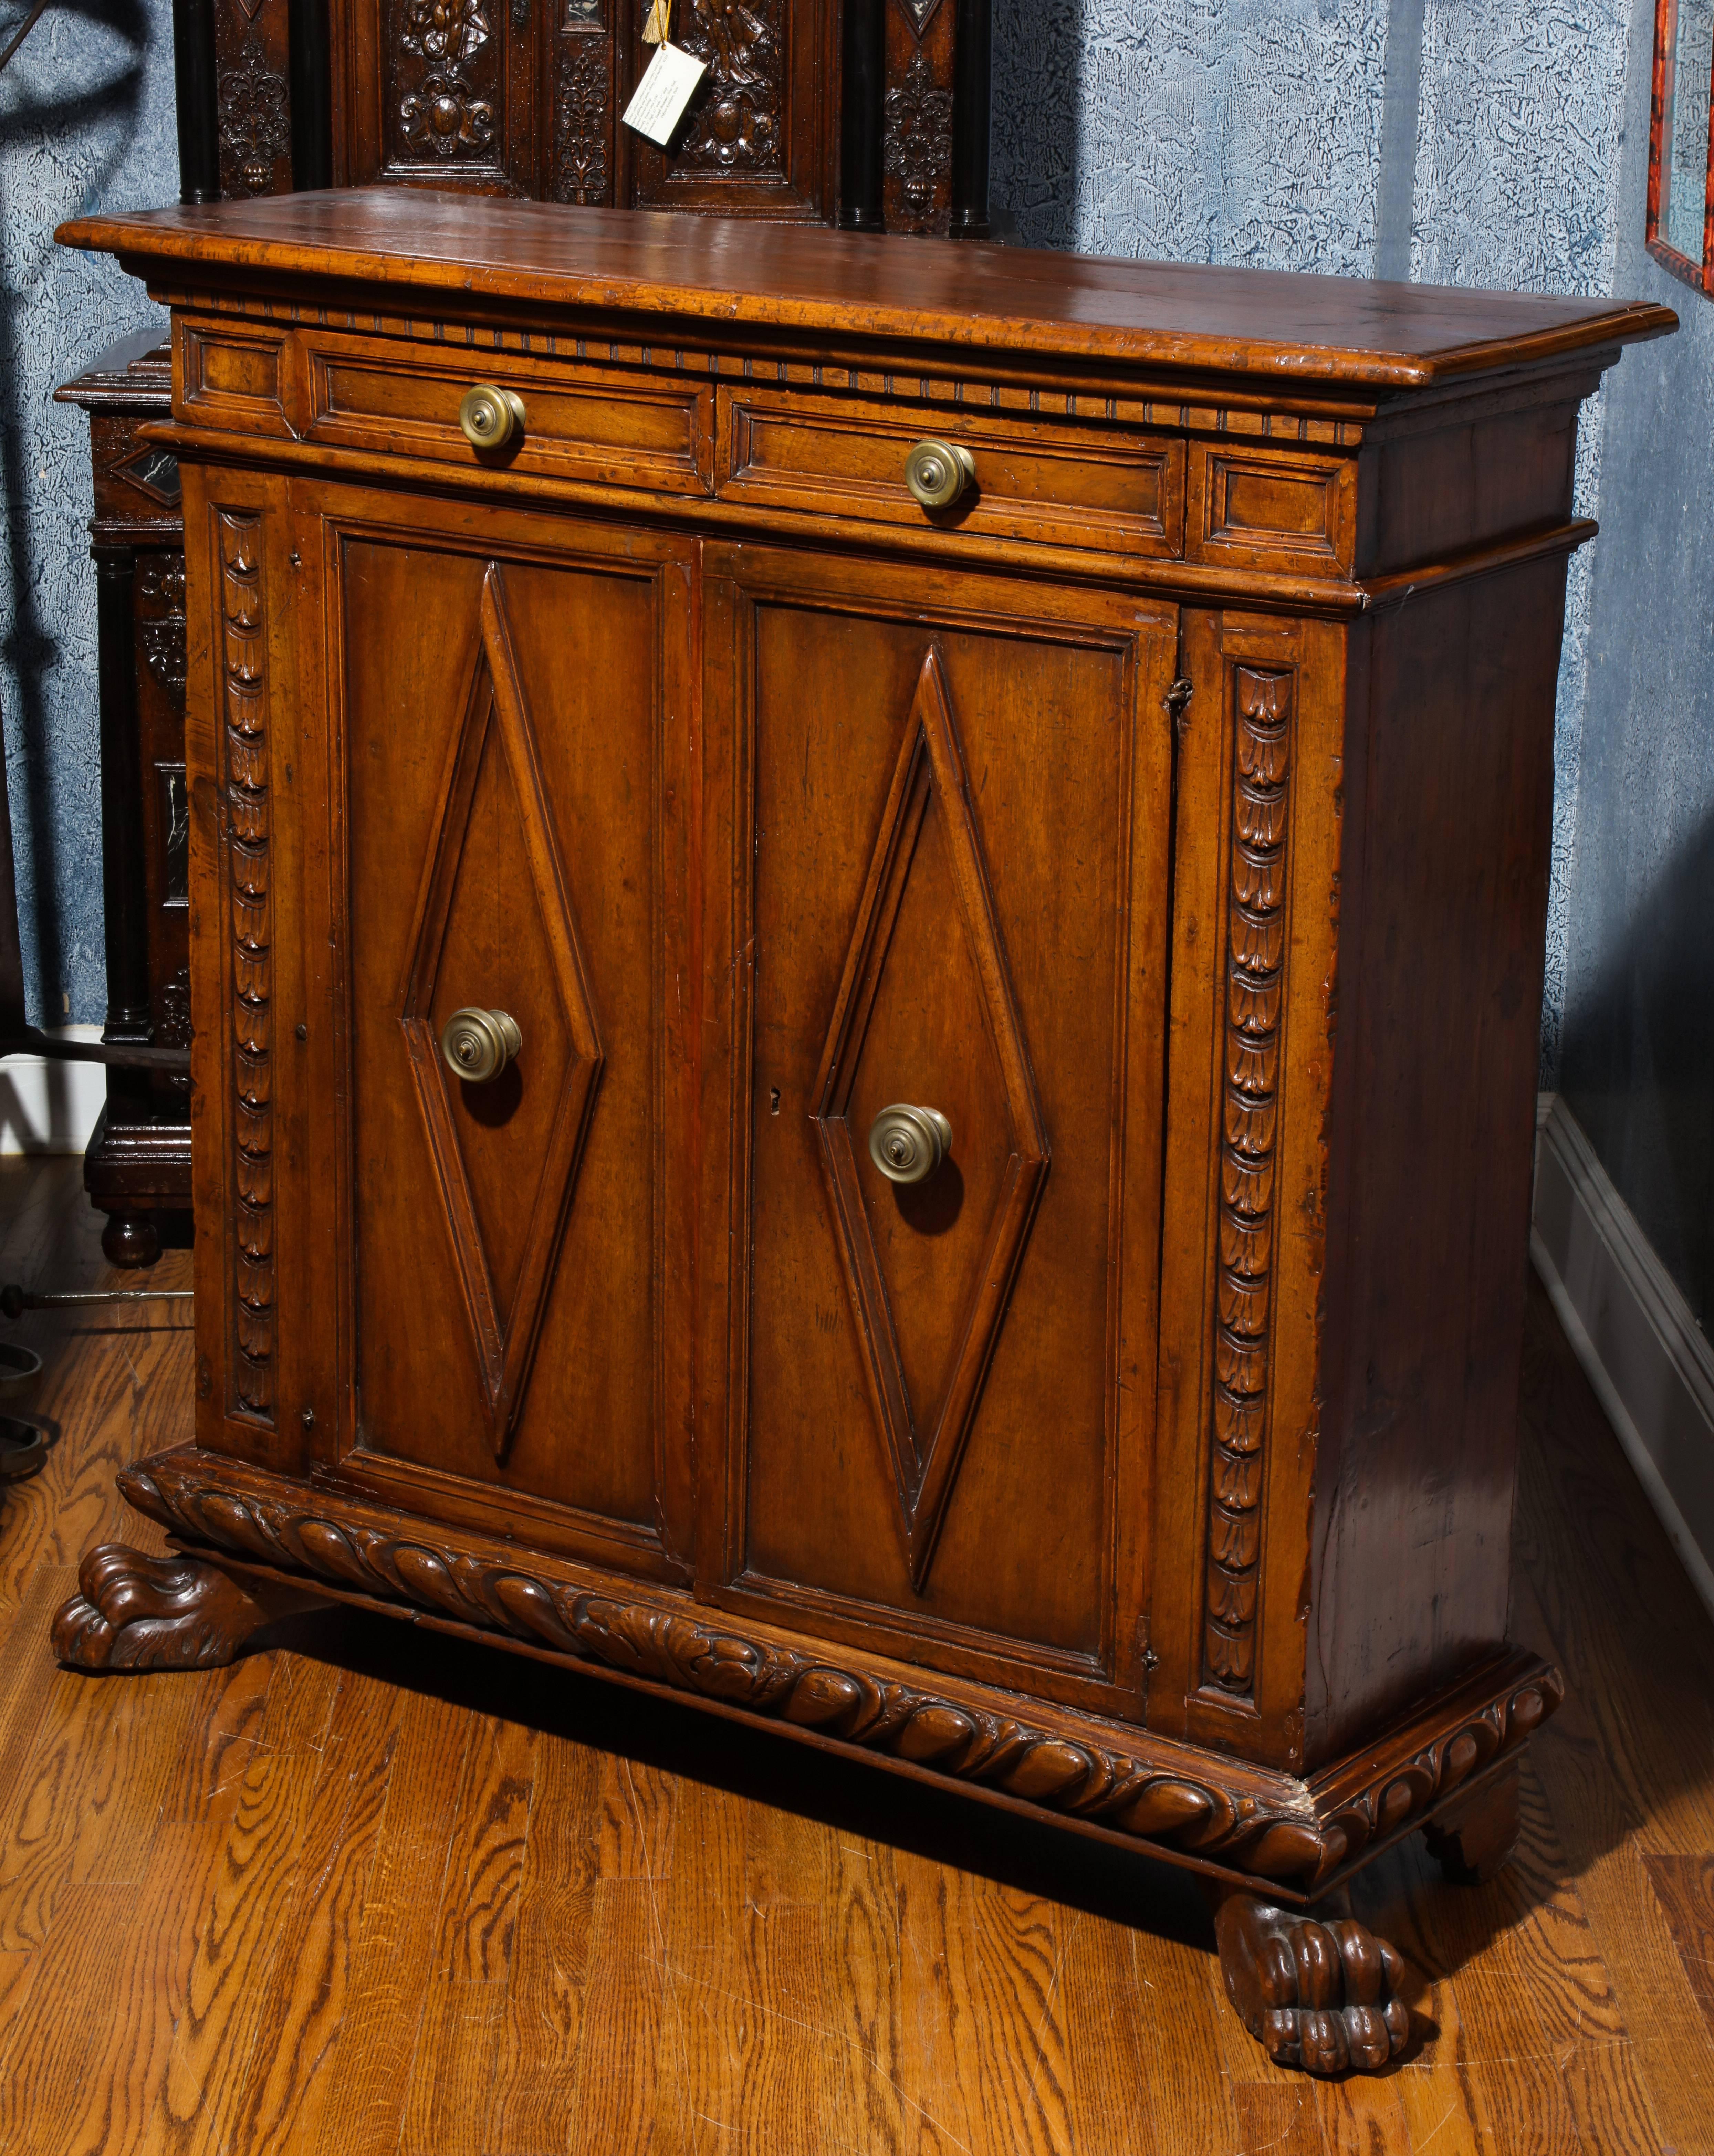 An Italian Renaissance carved walnut credenza or buffet with two doors inset with diamond form panels, below two drawers; both with large brass knobs; the whole resting on majestic carved paw feet. The frieze with dental carved molding and two front